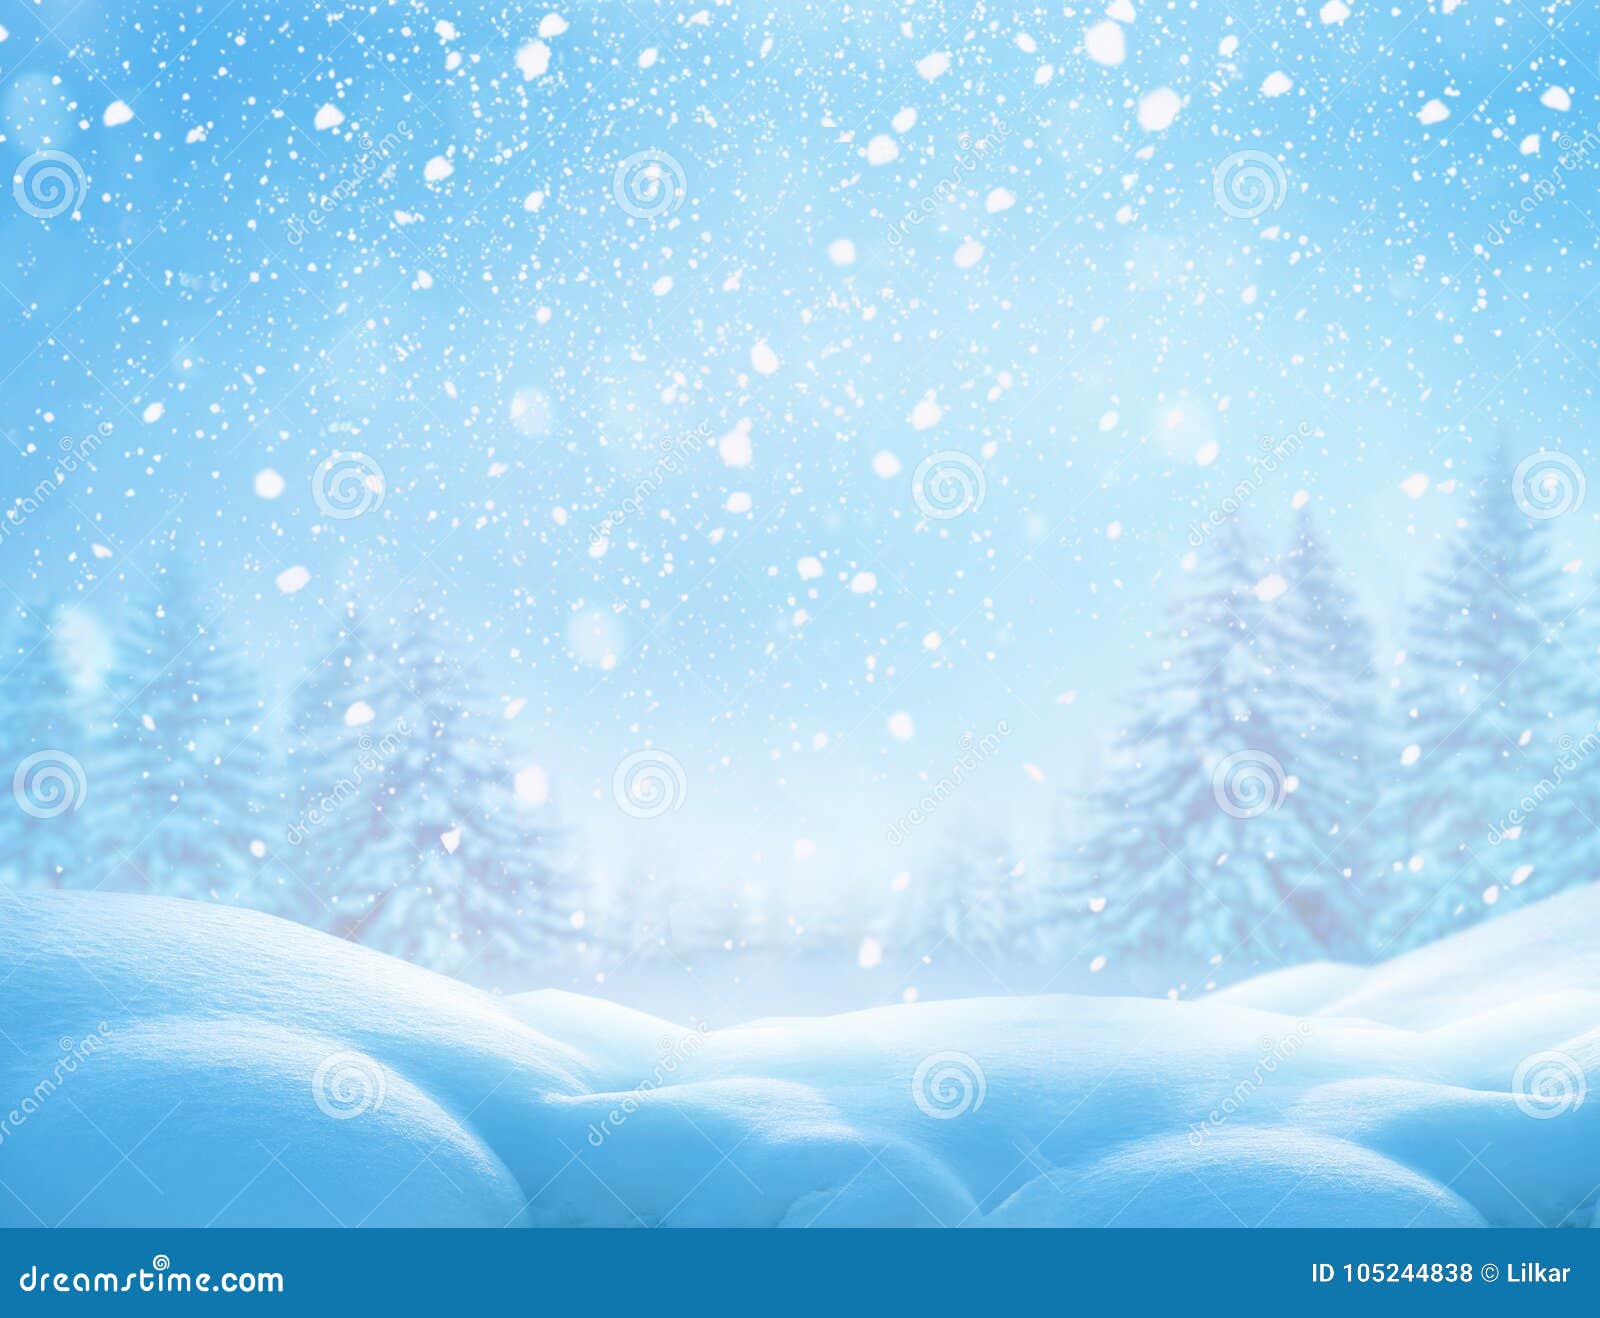 christmas winter background with snow